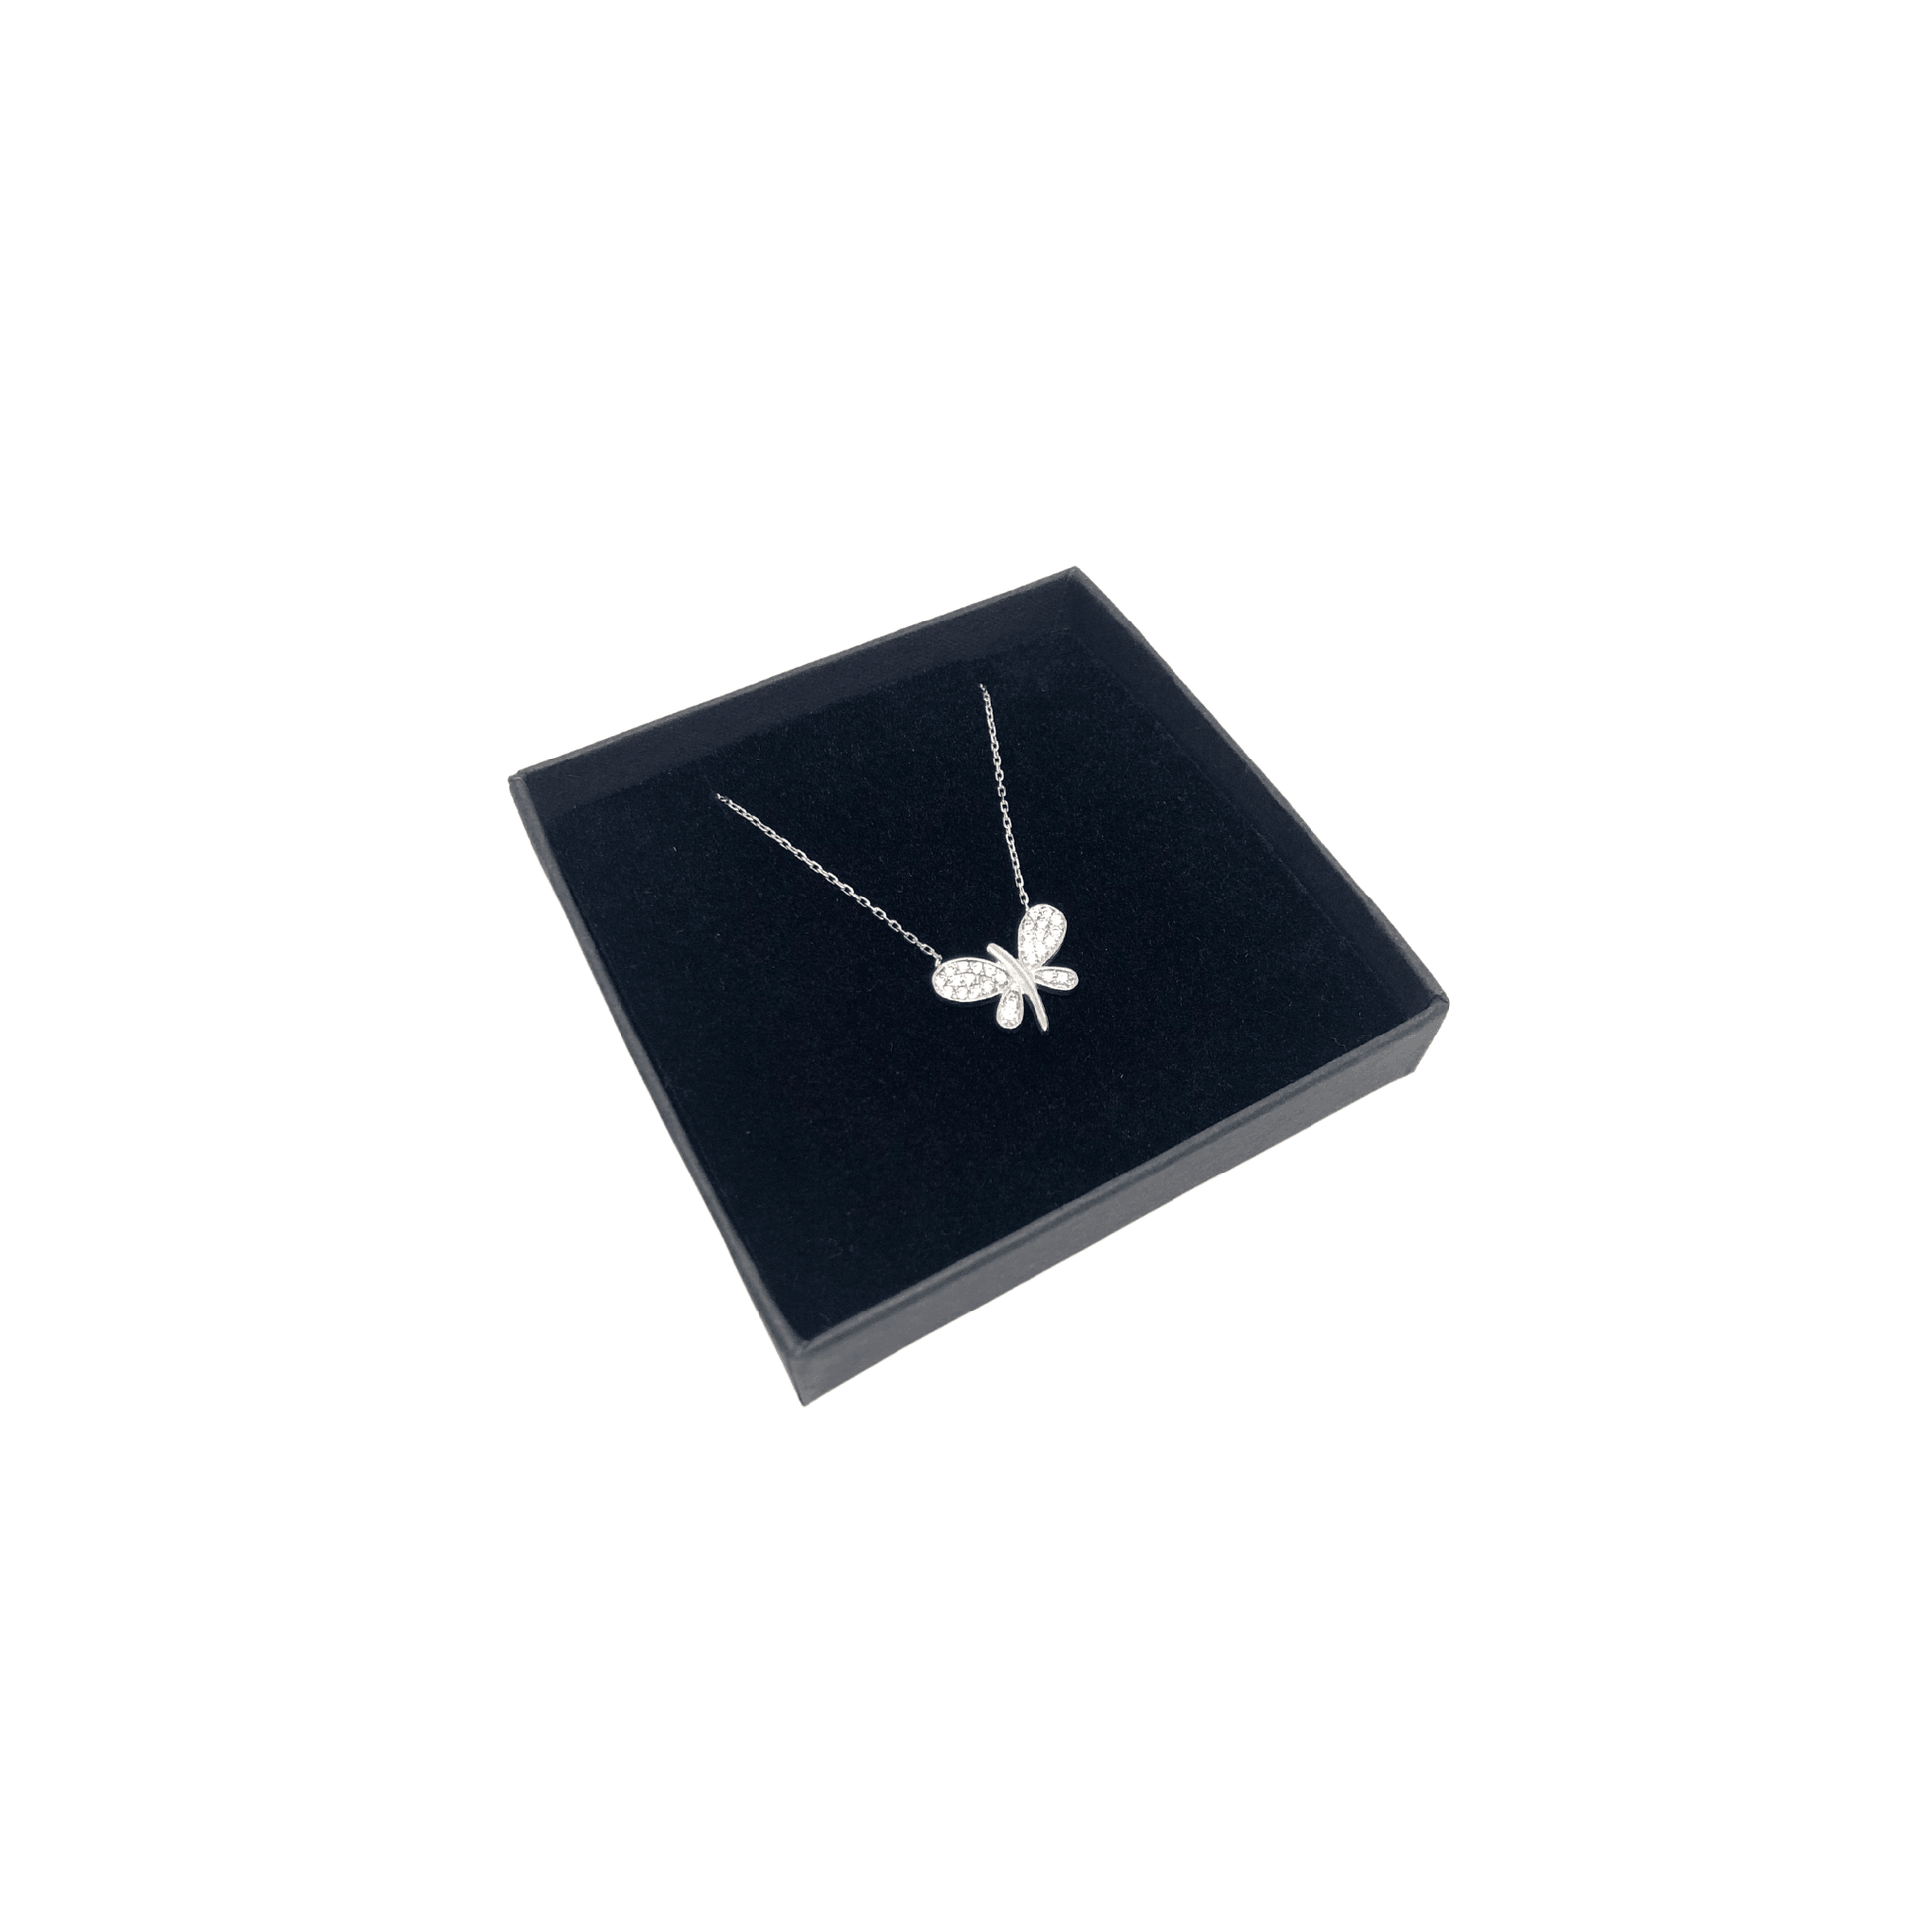 Dainty Silver Necklace for Woman, Dragonfly Necklace, 925 Sterling Silver Necklace - Naked Nation UK